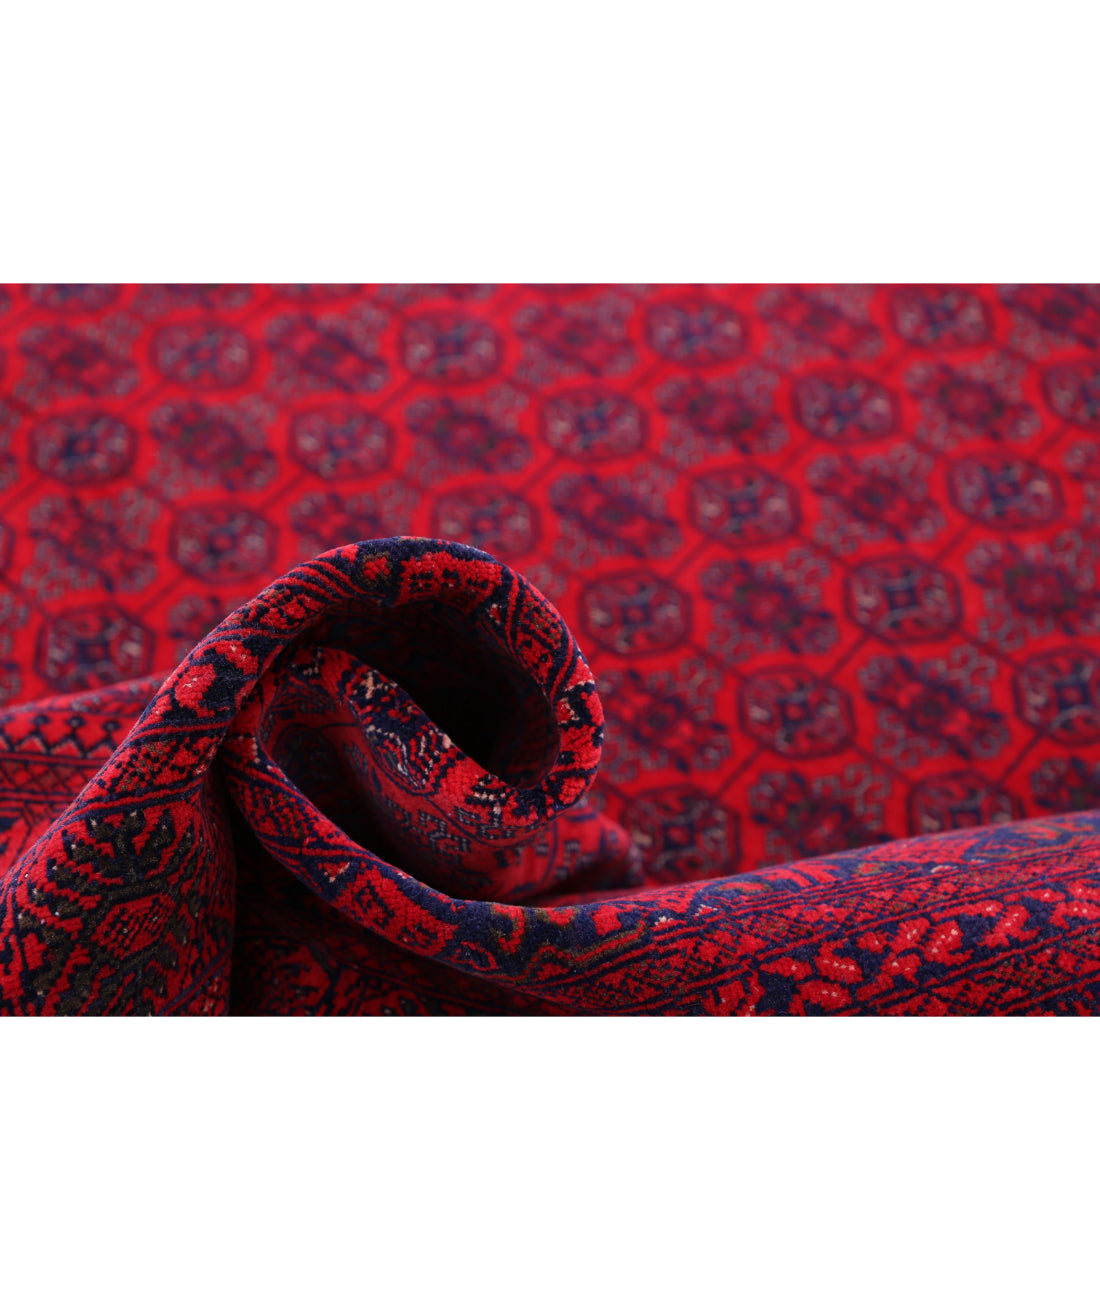 Hand Knotted Afghan Beljik Wool Rug - 6'5'' x 9'6'' 6'5'' x 9'6'' (193 X 285) / Red / Red